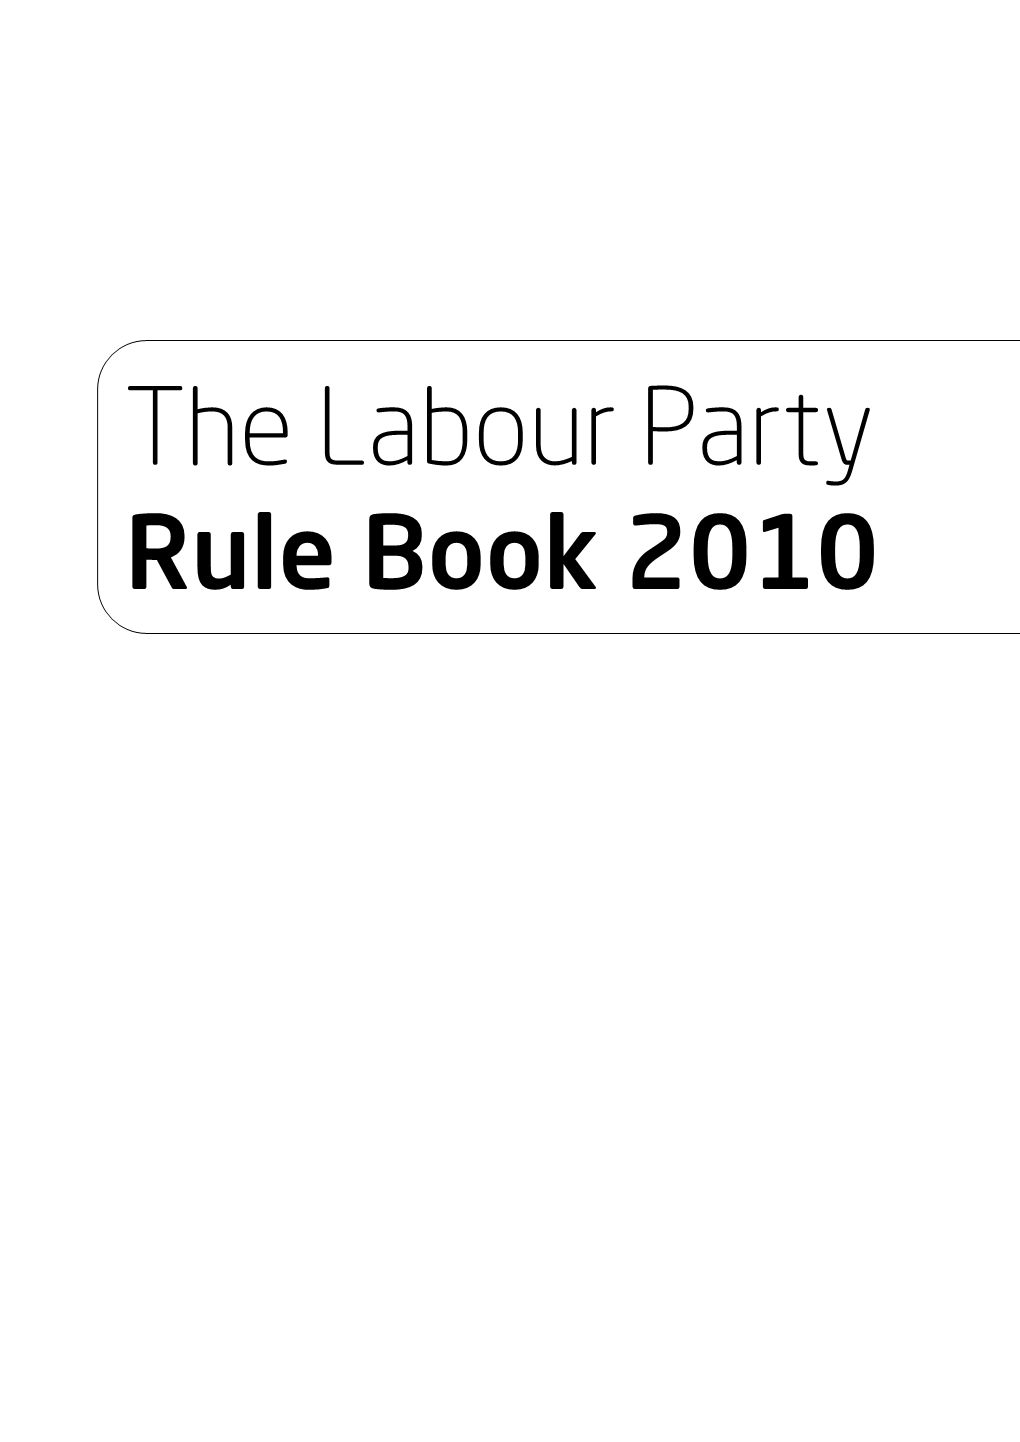 The Labour Party Rule Book 2010